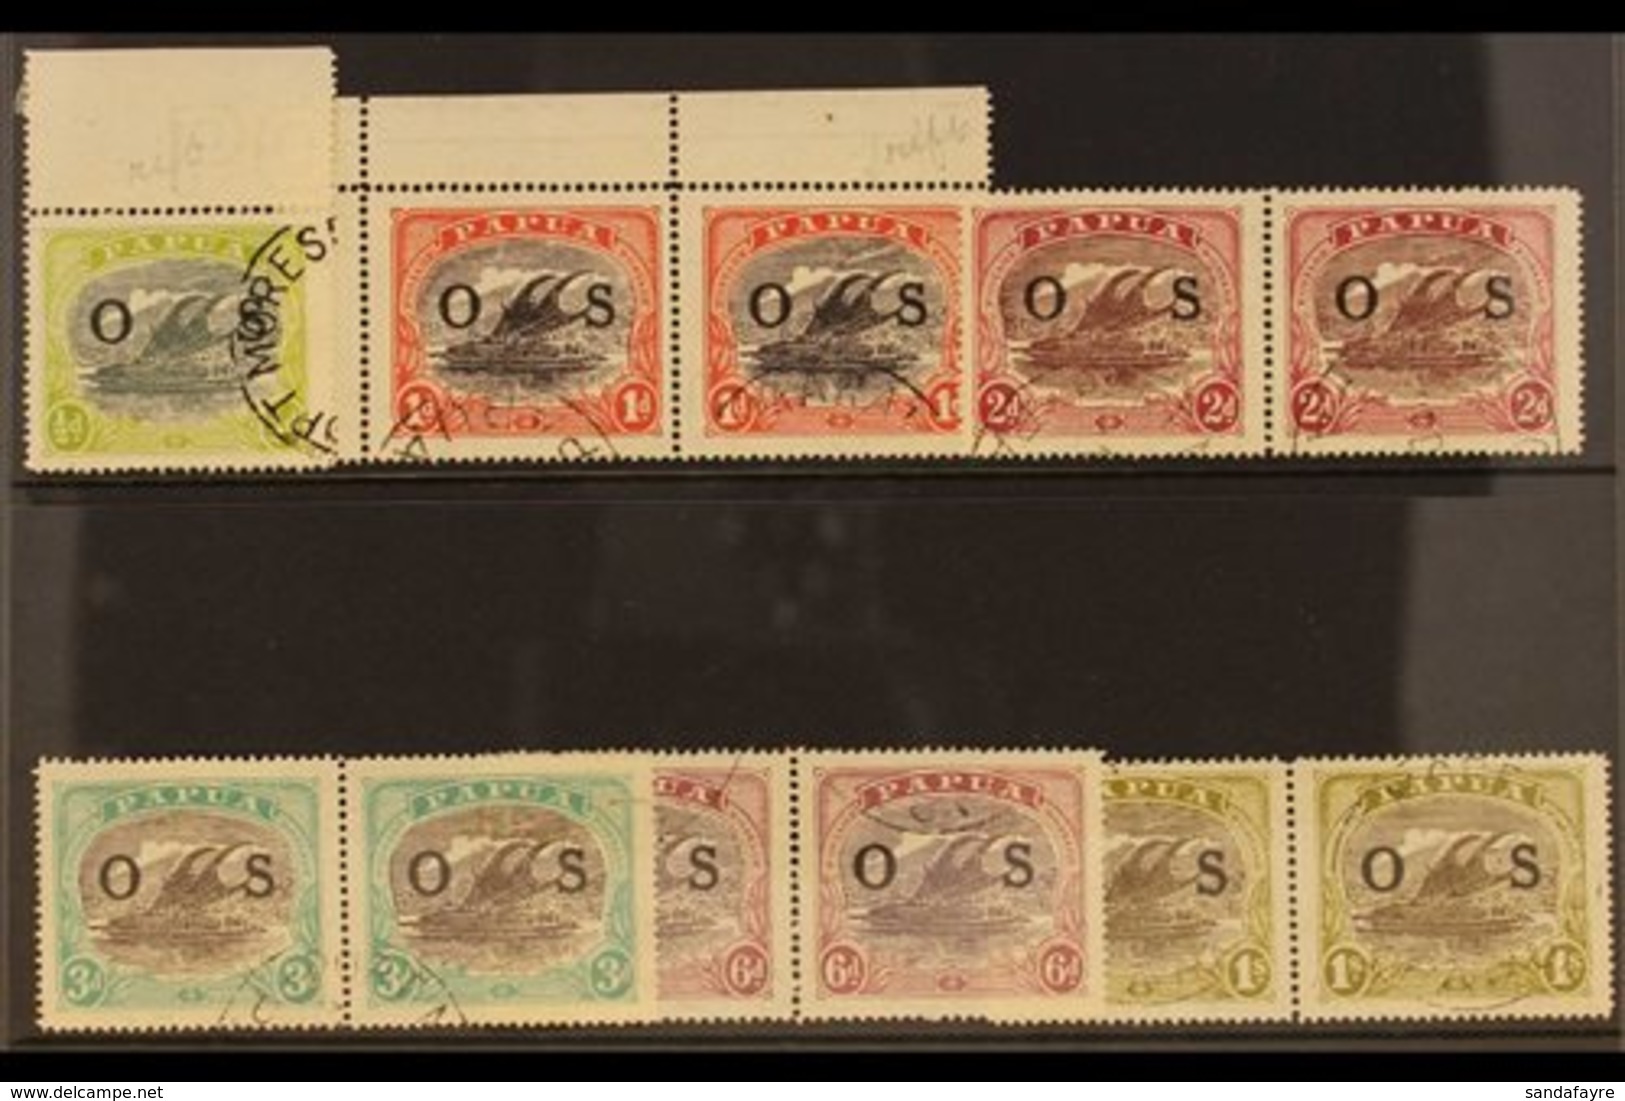 OFFICIALS WITH "RIFT IN CLOUD" FLAW  1931-32. VARIETIES. An "O S" Overprinted Fine Used Range Bearing "RIFT IN CLOUD"  V - Papua-Neuguinea